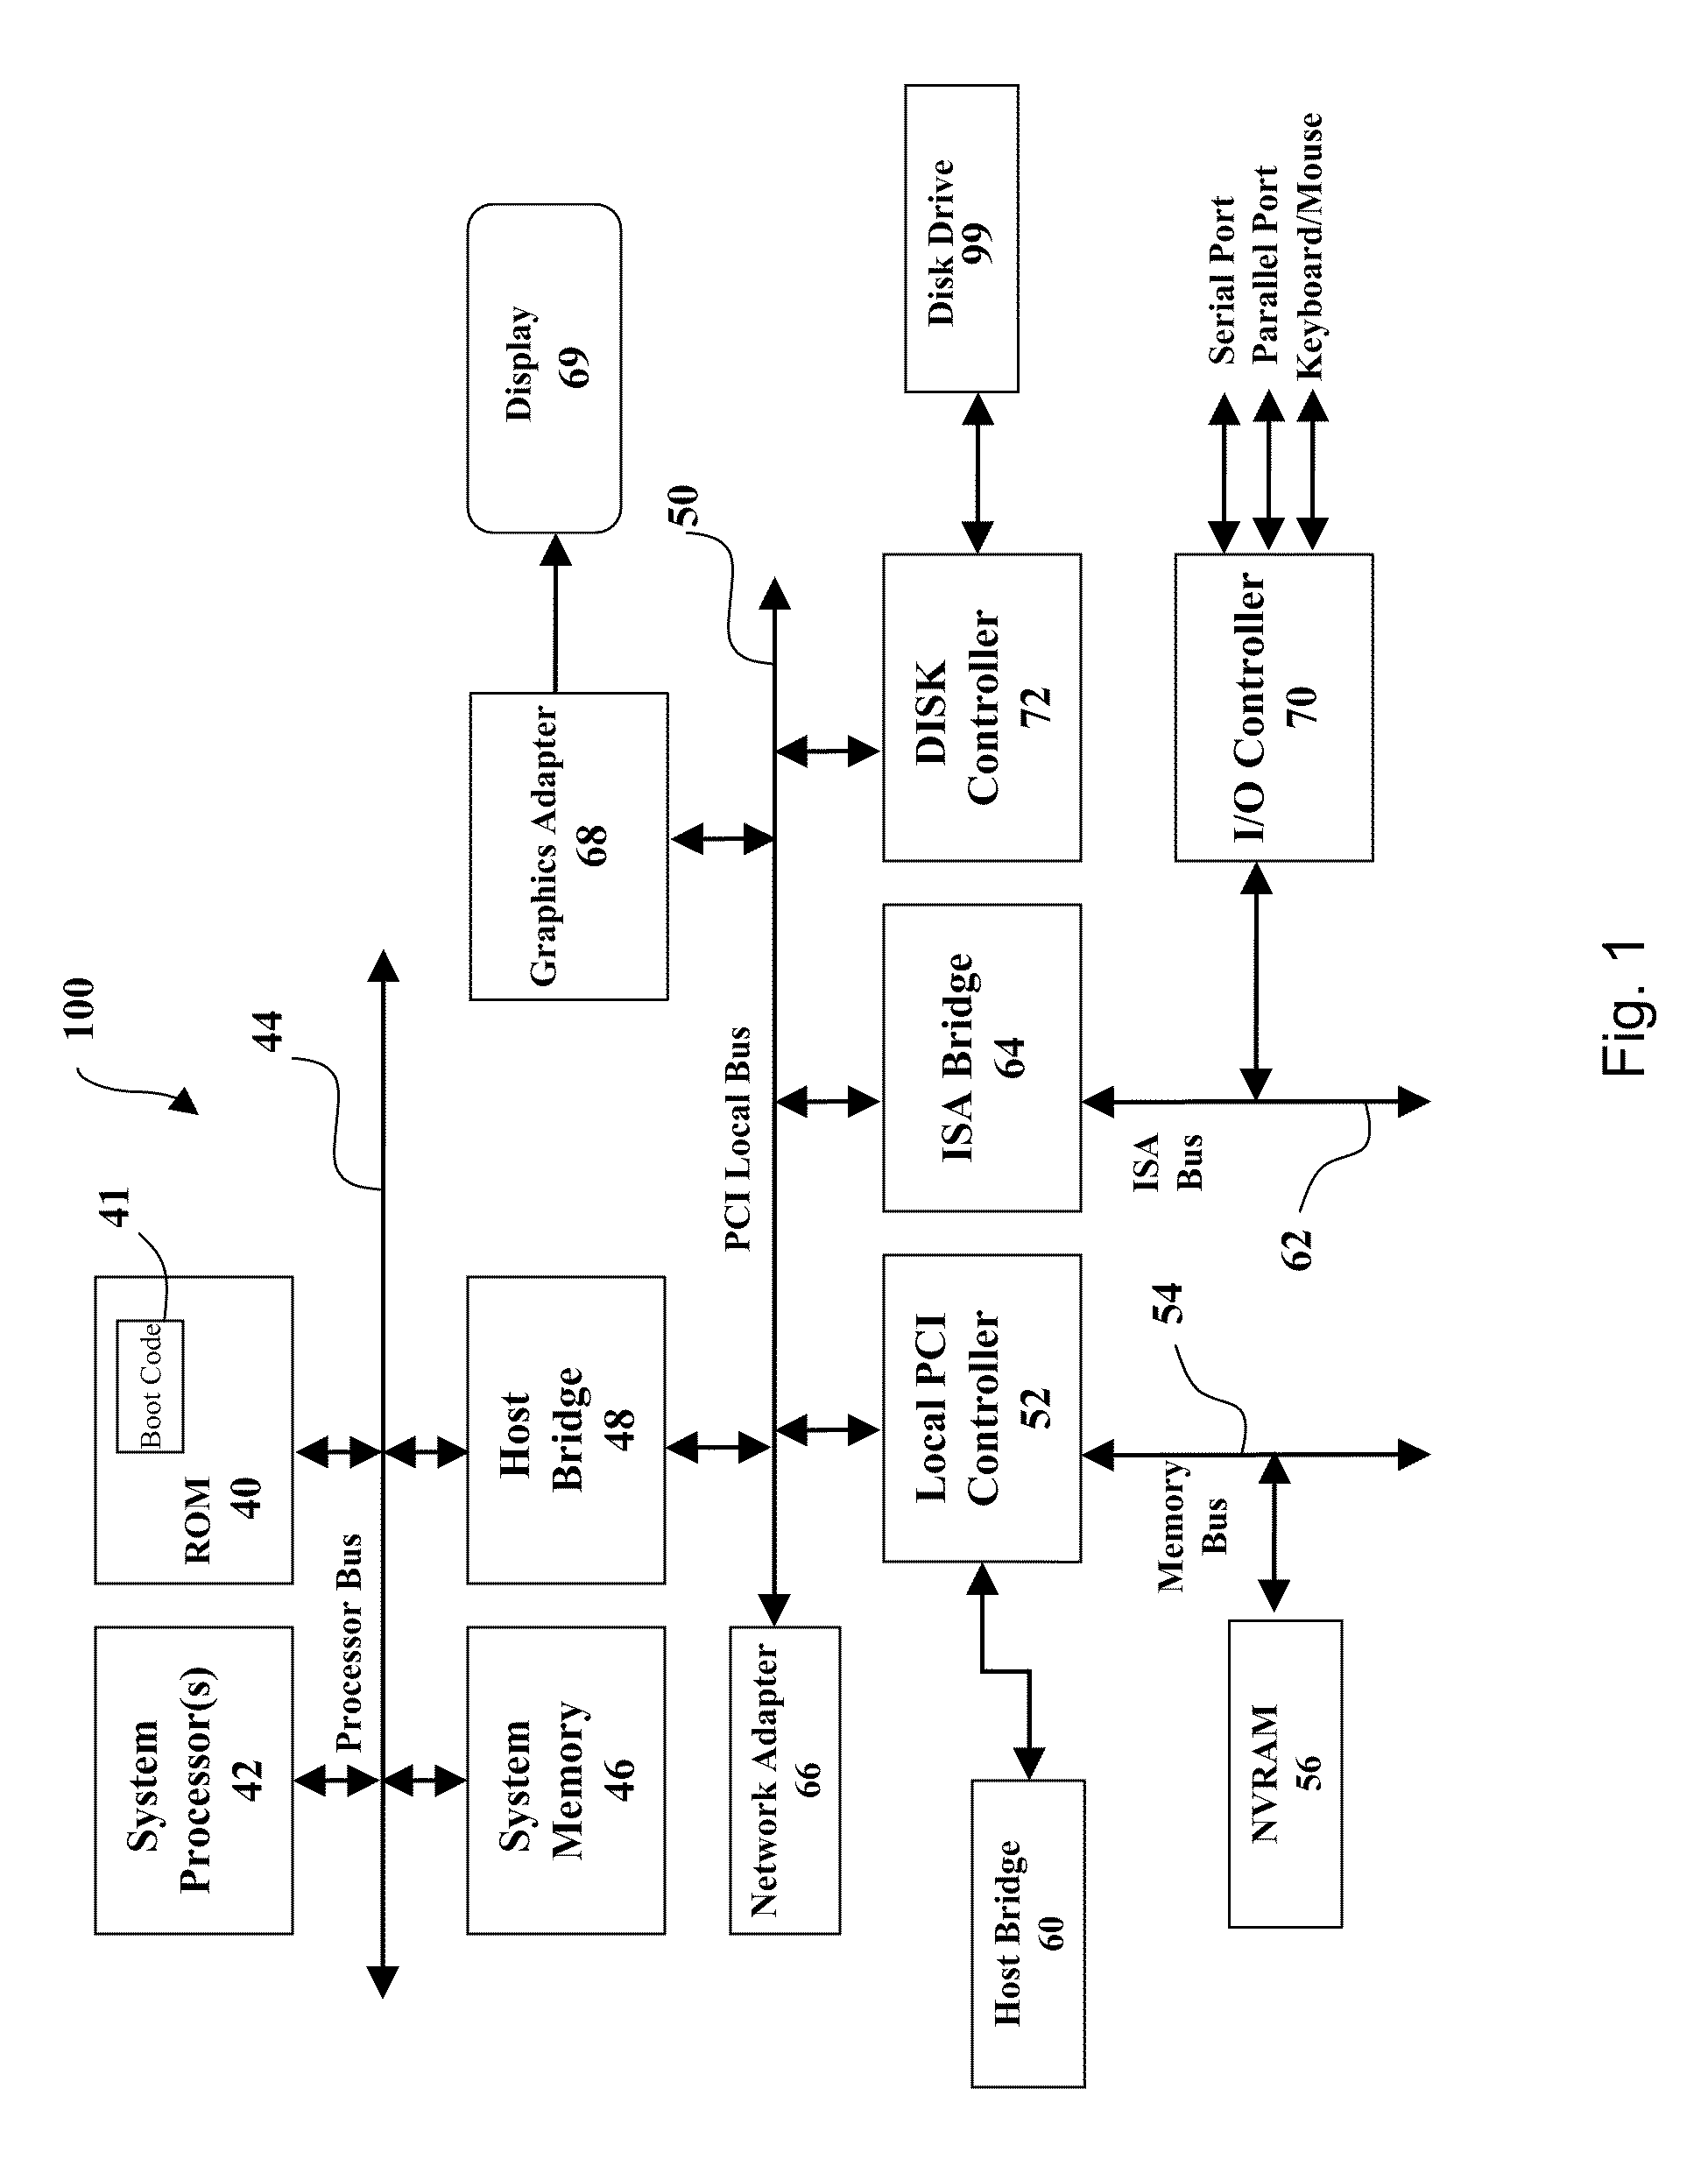 Decision support system and method for distributed decision making for optimal human resource deployment